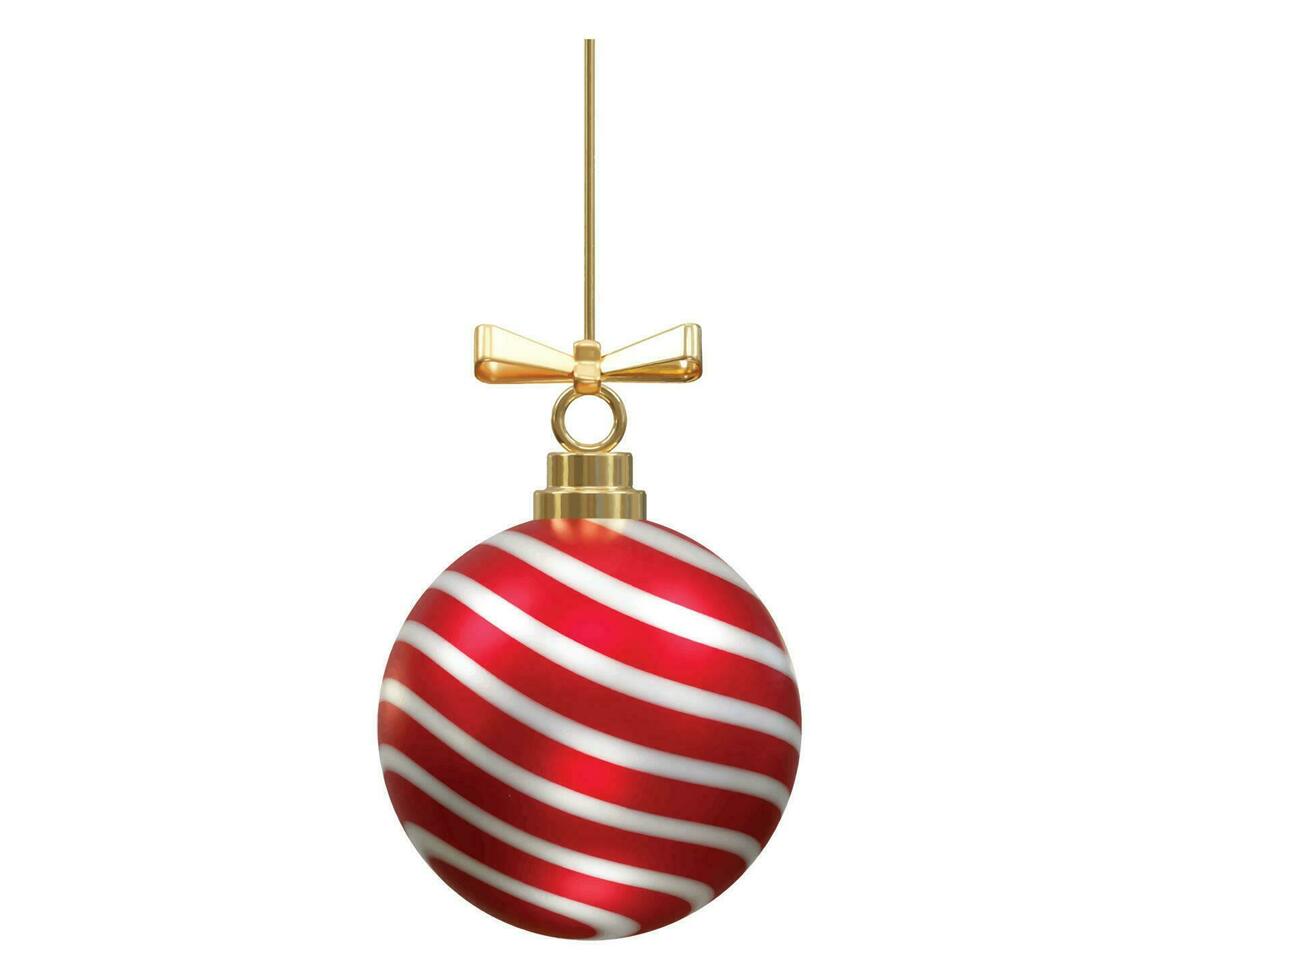 Christmas ball icon vector design transparent 3d rendering